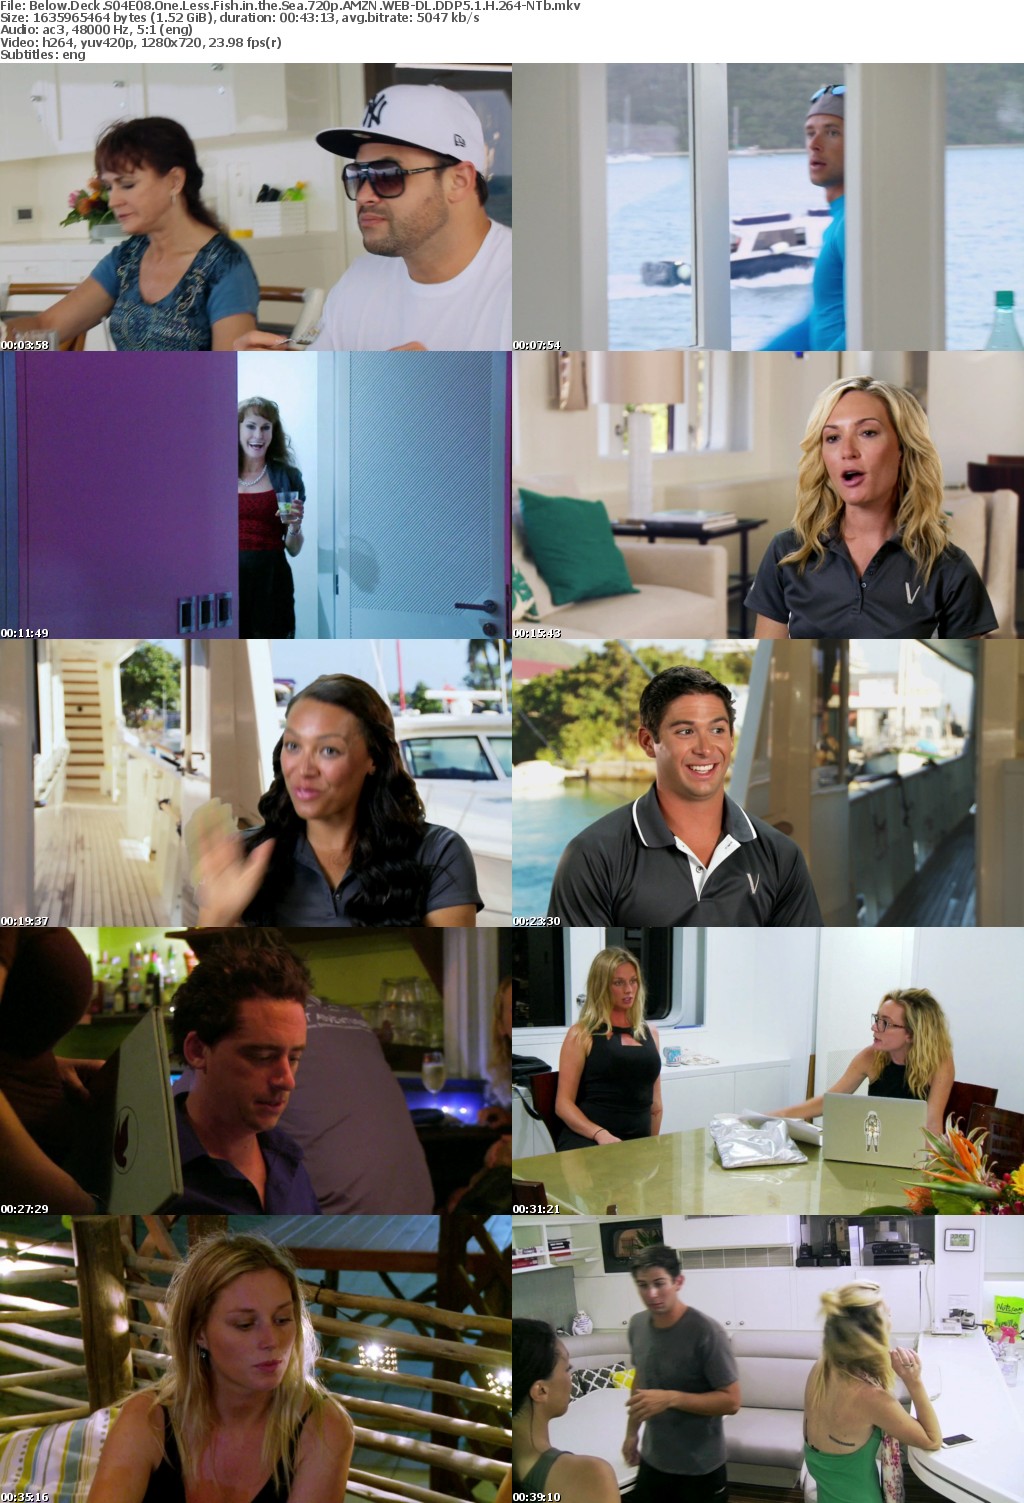 Below Deck S04E08 One Less Fish in the Sea 720p AMZN WEB-DL DDP5 1 H 264-NTb